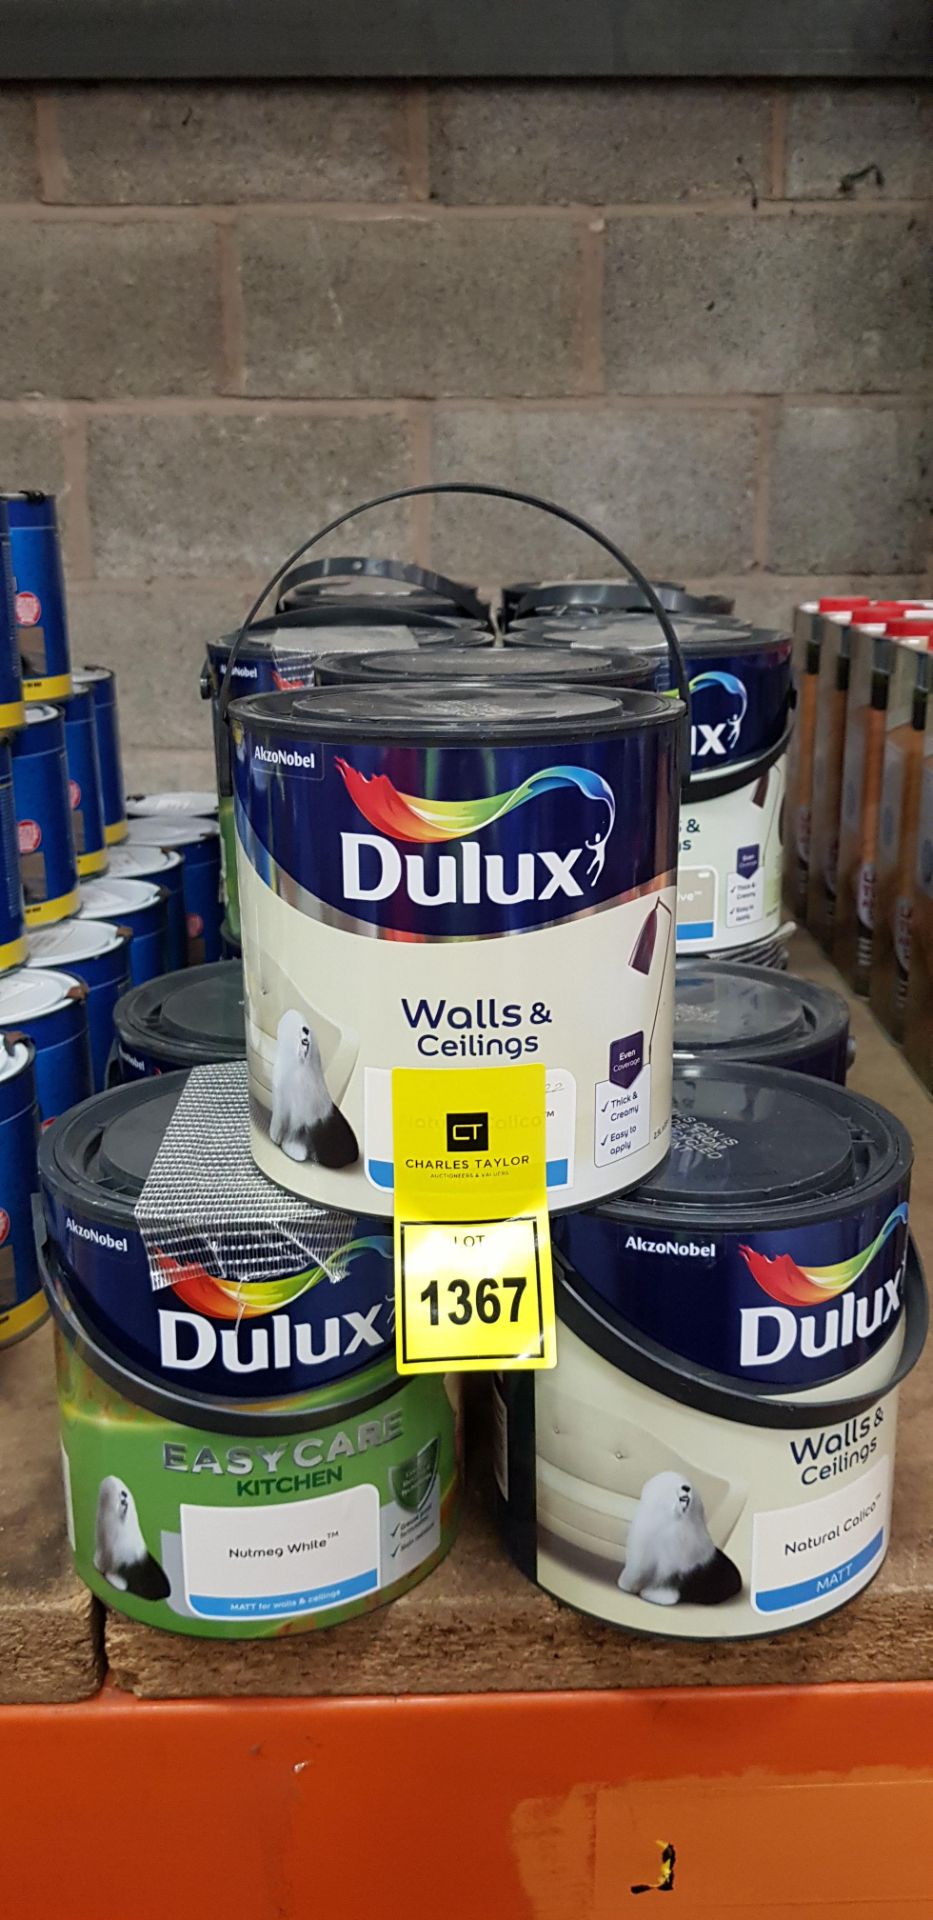 22 X BRAND NEW DULUX WALLS AND CEILINGS AND BATHROOM PAINT TO INCLUDE NATURAL CALICO , NUTMEG